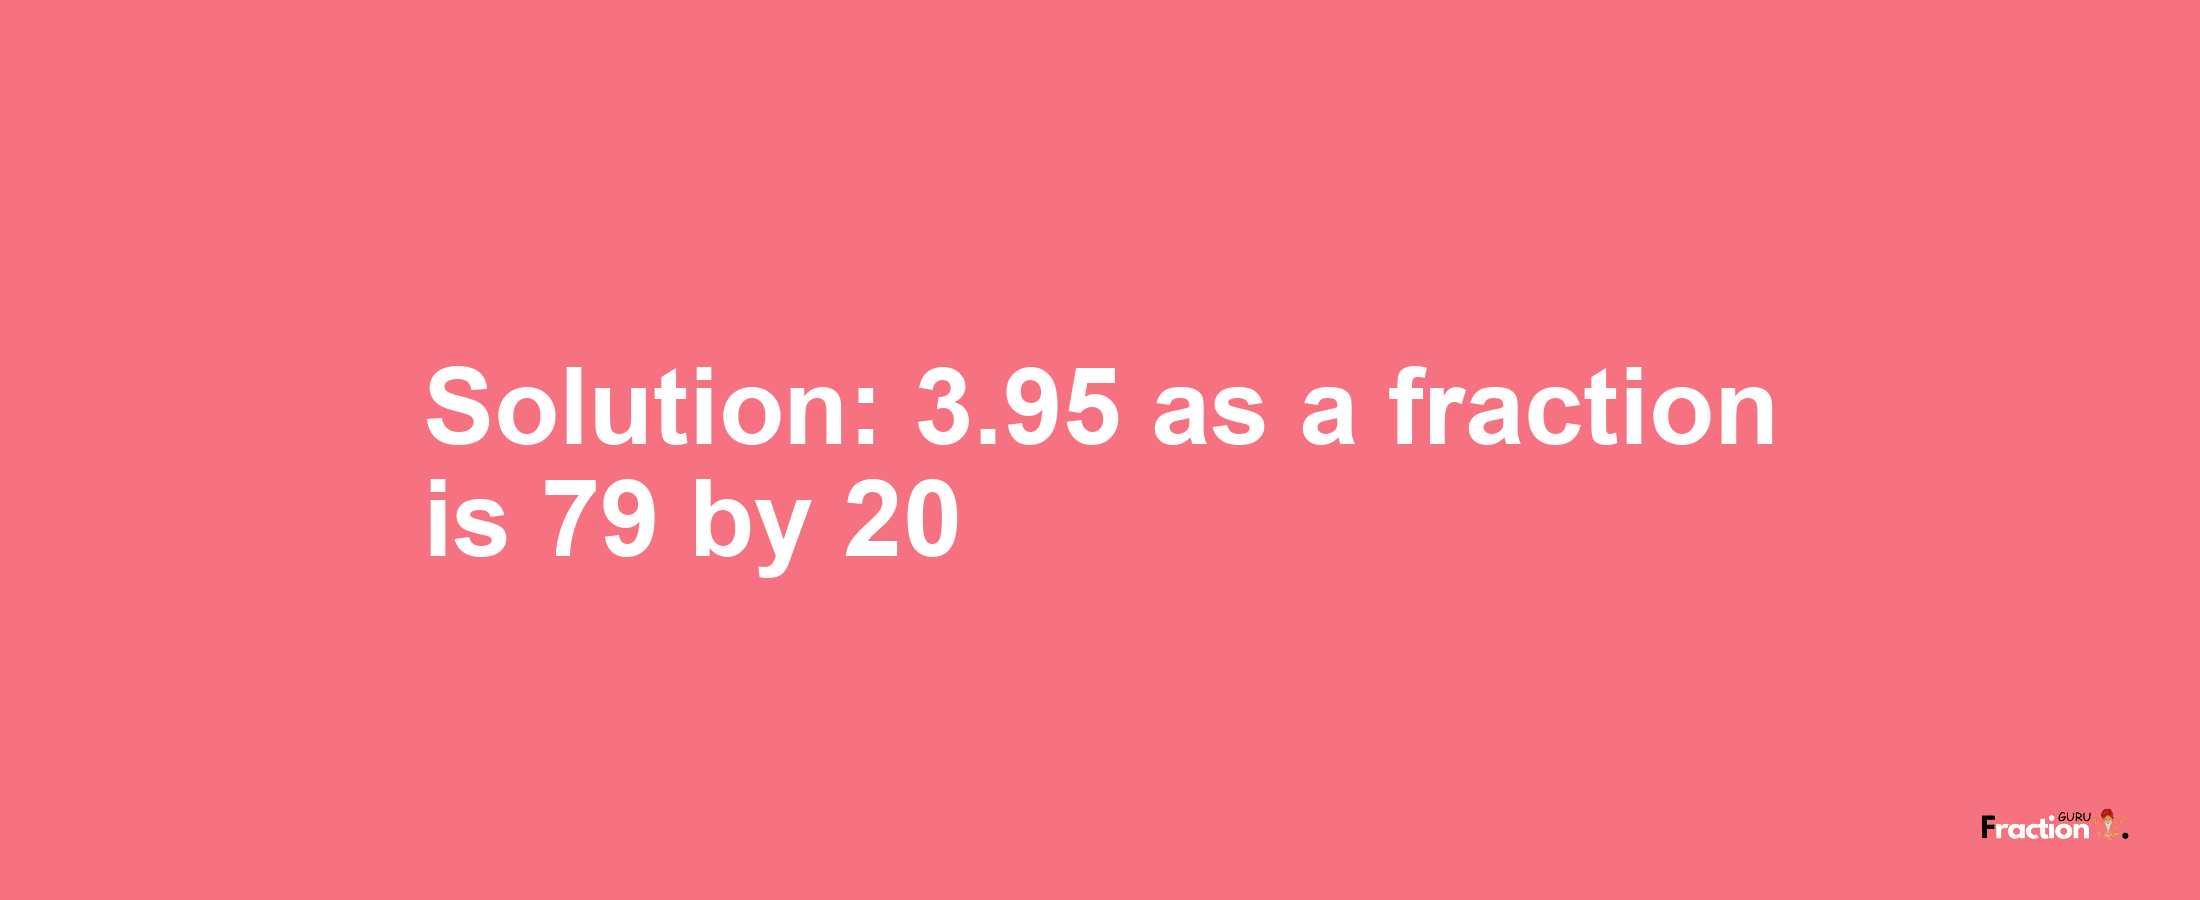 Solution:3.95 as a fraction is 79/20